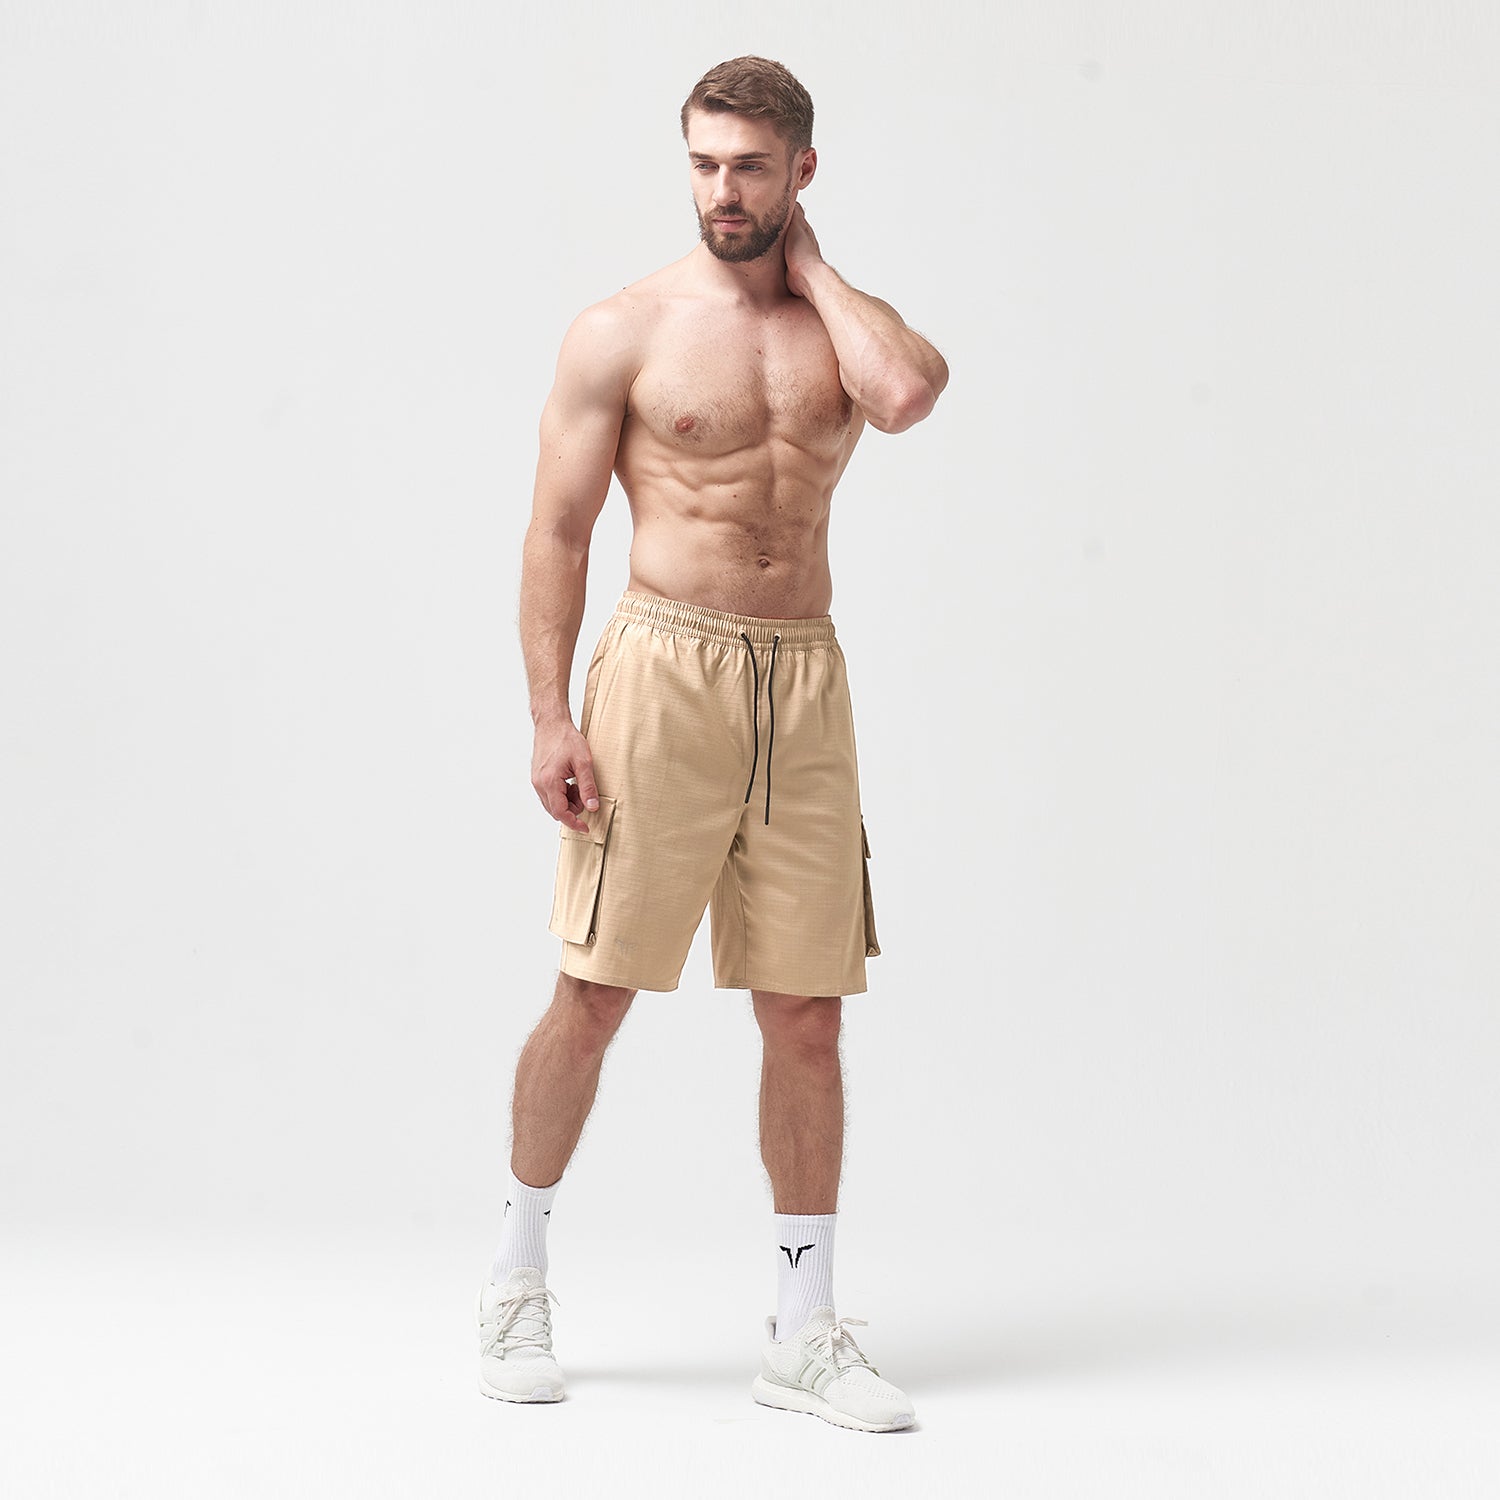 squatwolf-gym-wear-code-2-in-1-knee-length-cargo-shorts-cobblestone-workout-short-for-men